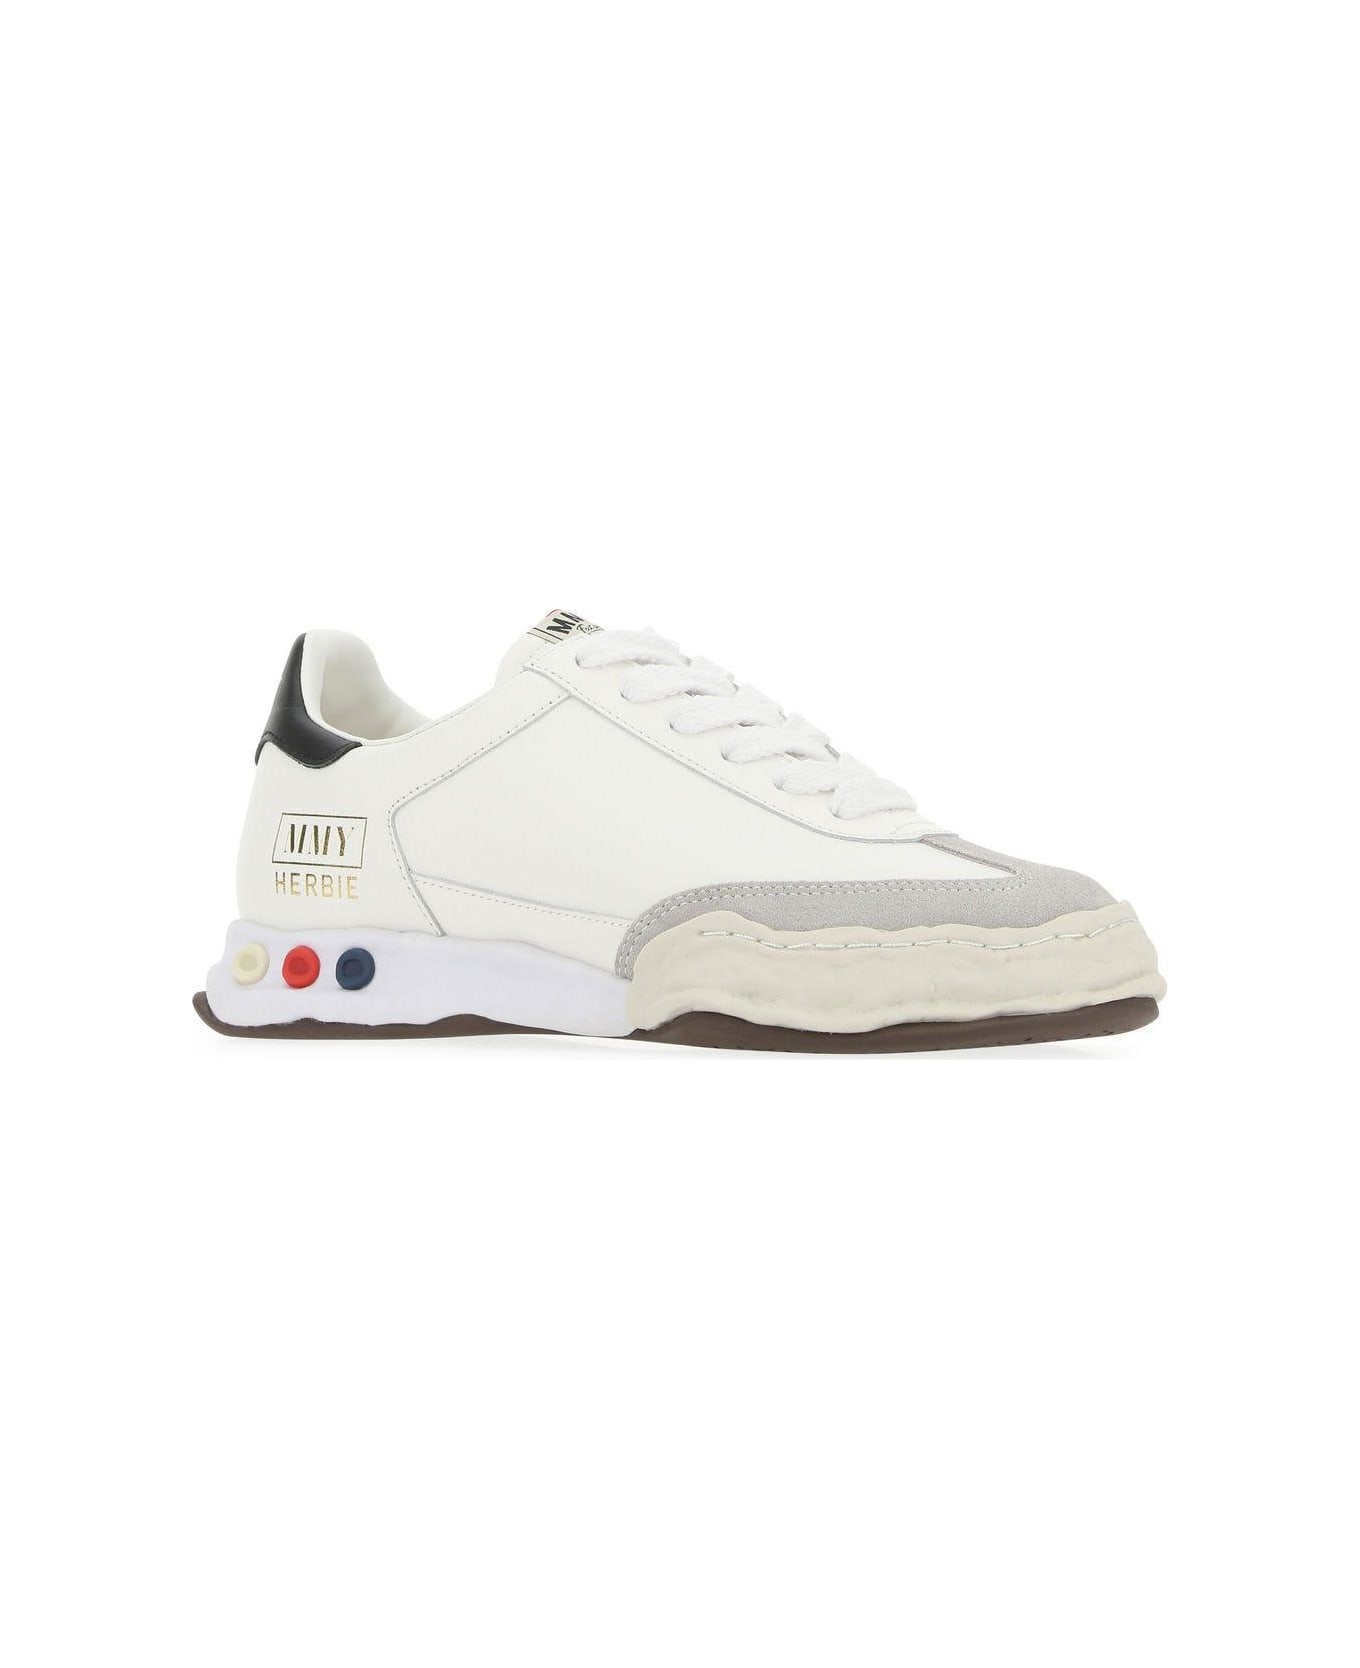 Mihara Yasuhiro Multicolor Suede And Leather Sneakers - WHITE/MULTICOLOUR